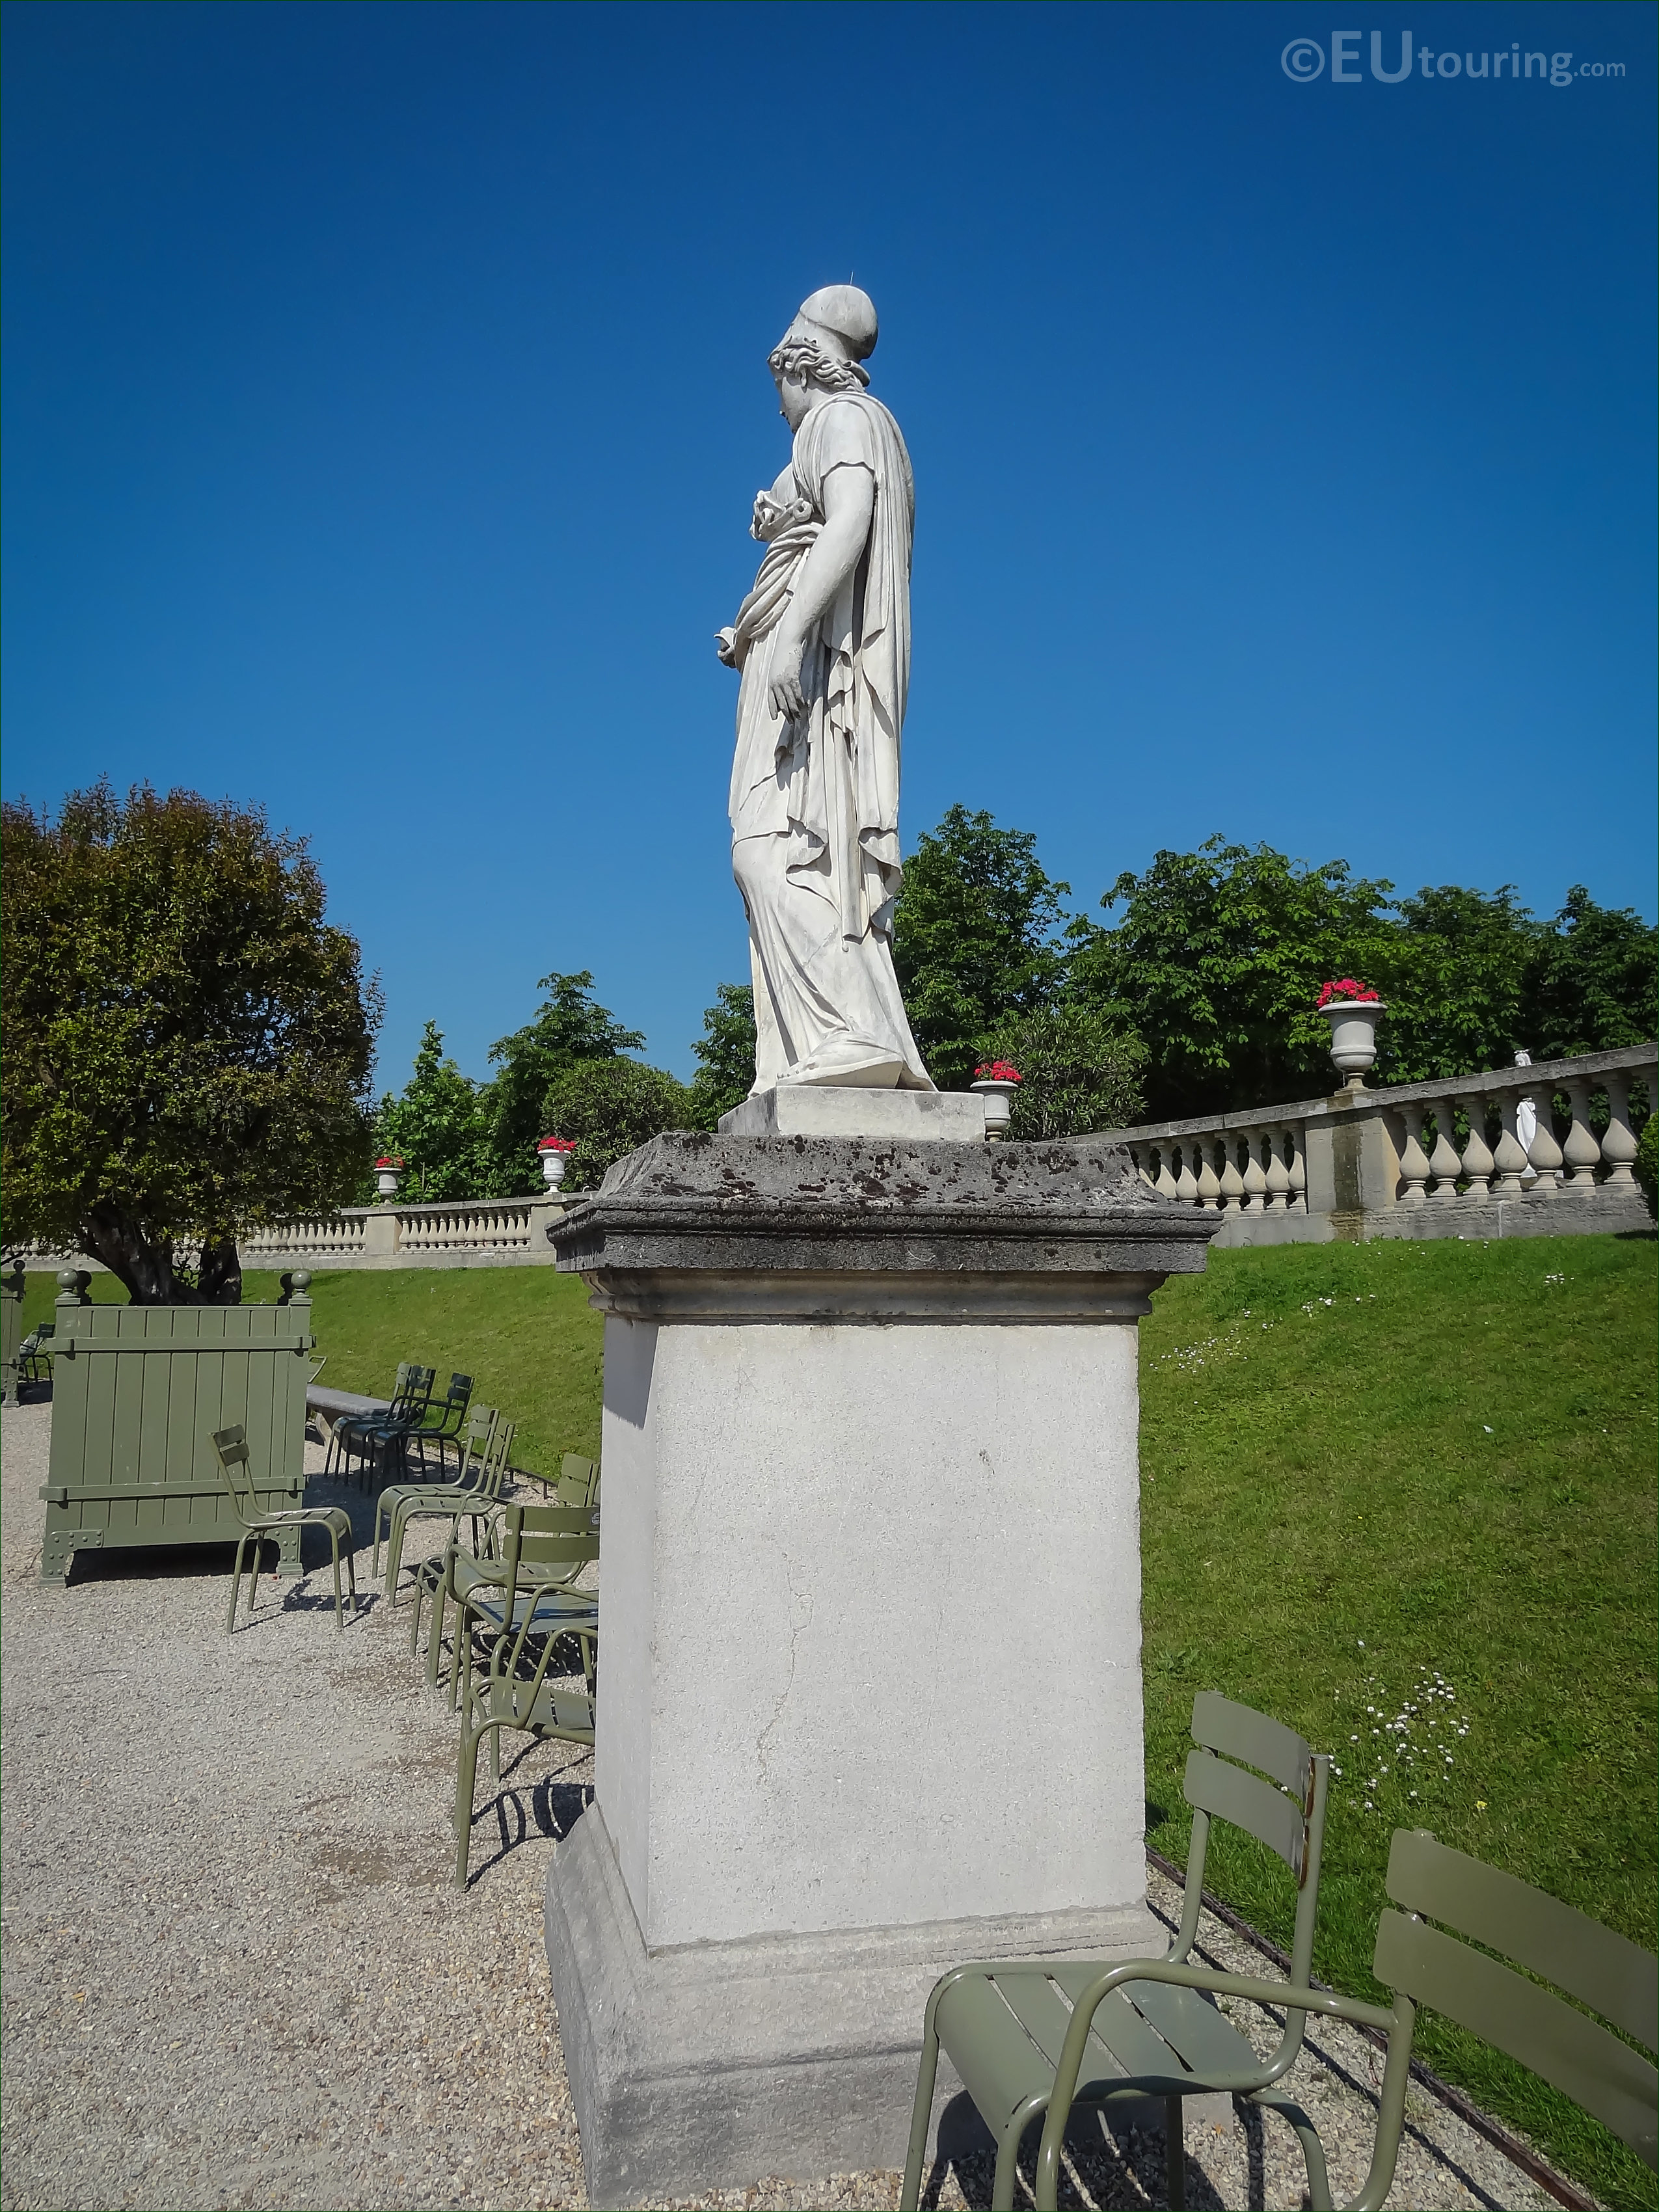 Minerva the Goddess of Wisdom statue in Luxembourg Gardens - Page 449